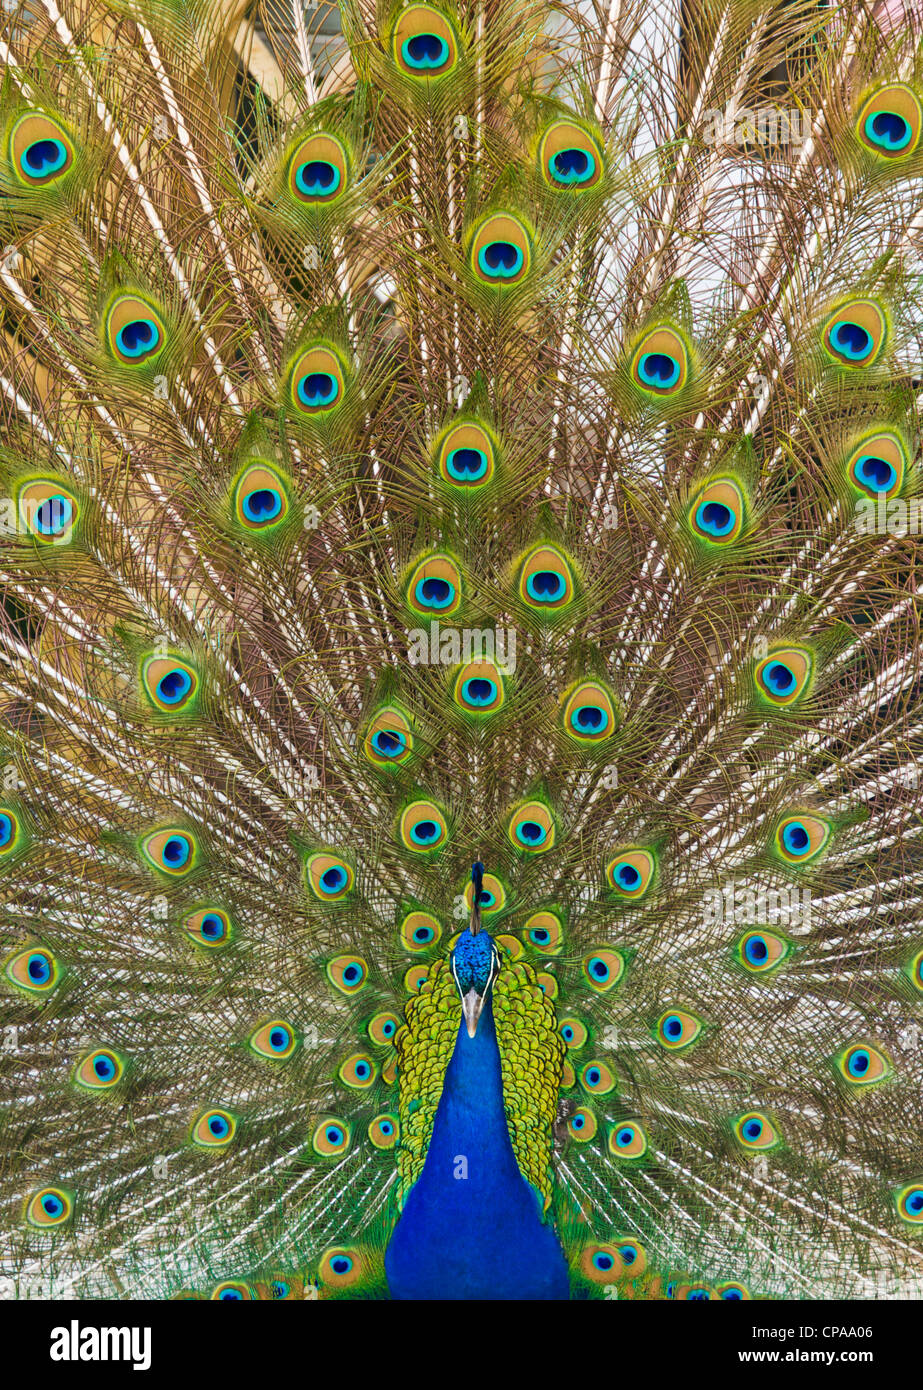 Male peacock displaying showing tail feathers Stock Photo